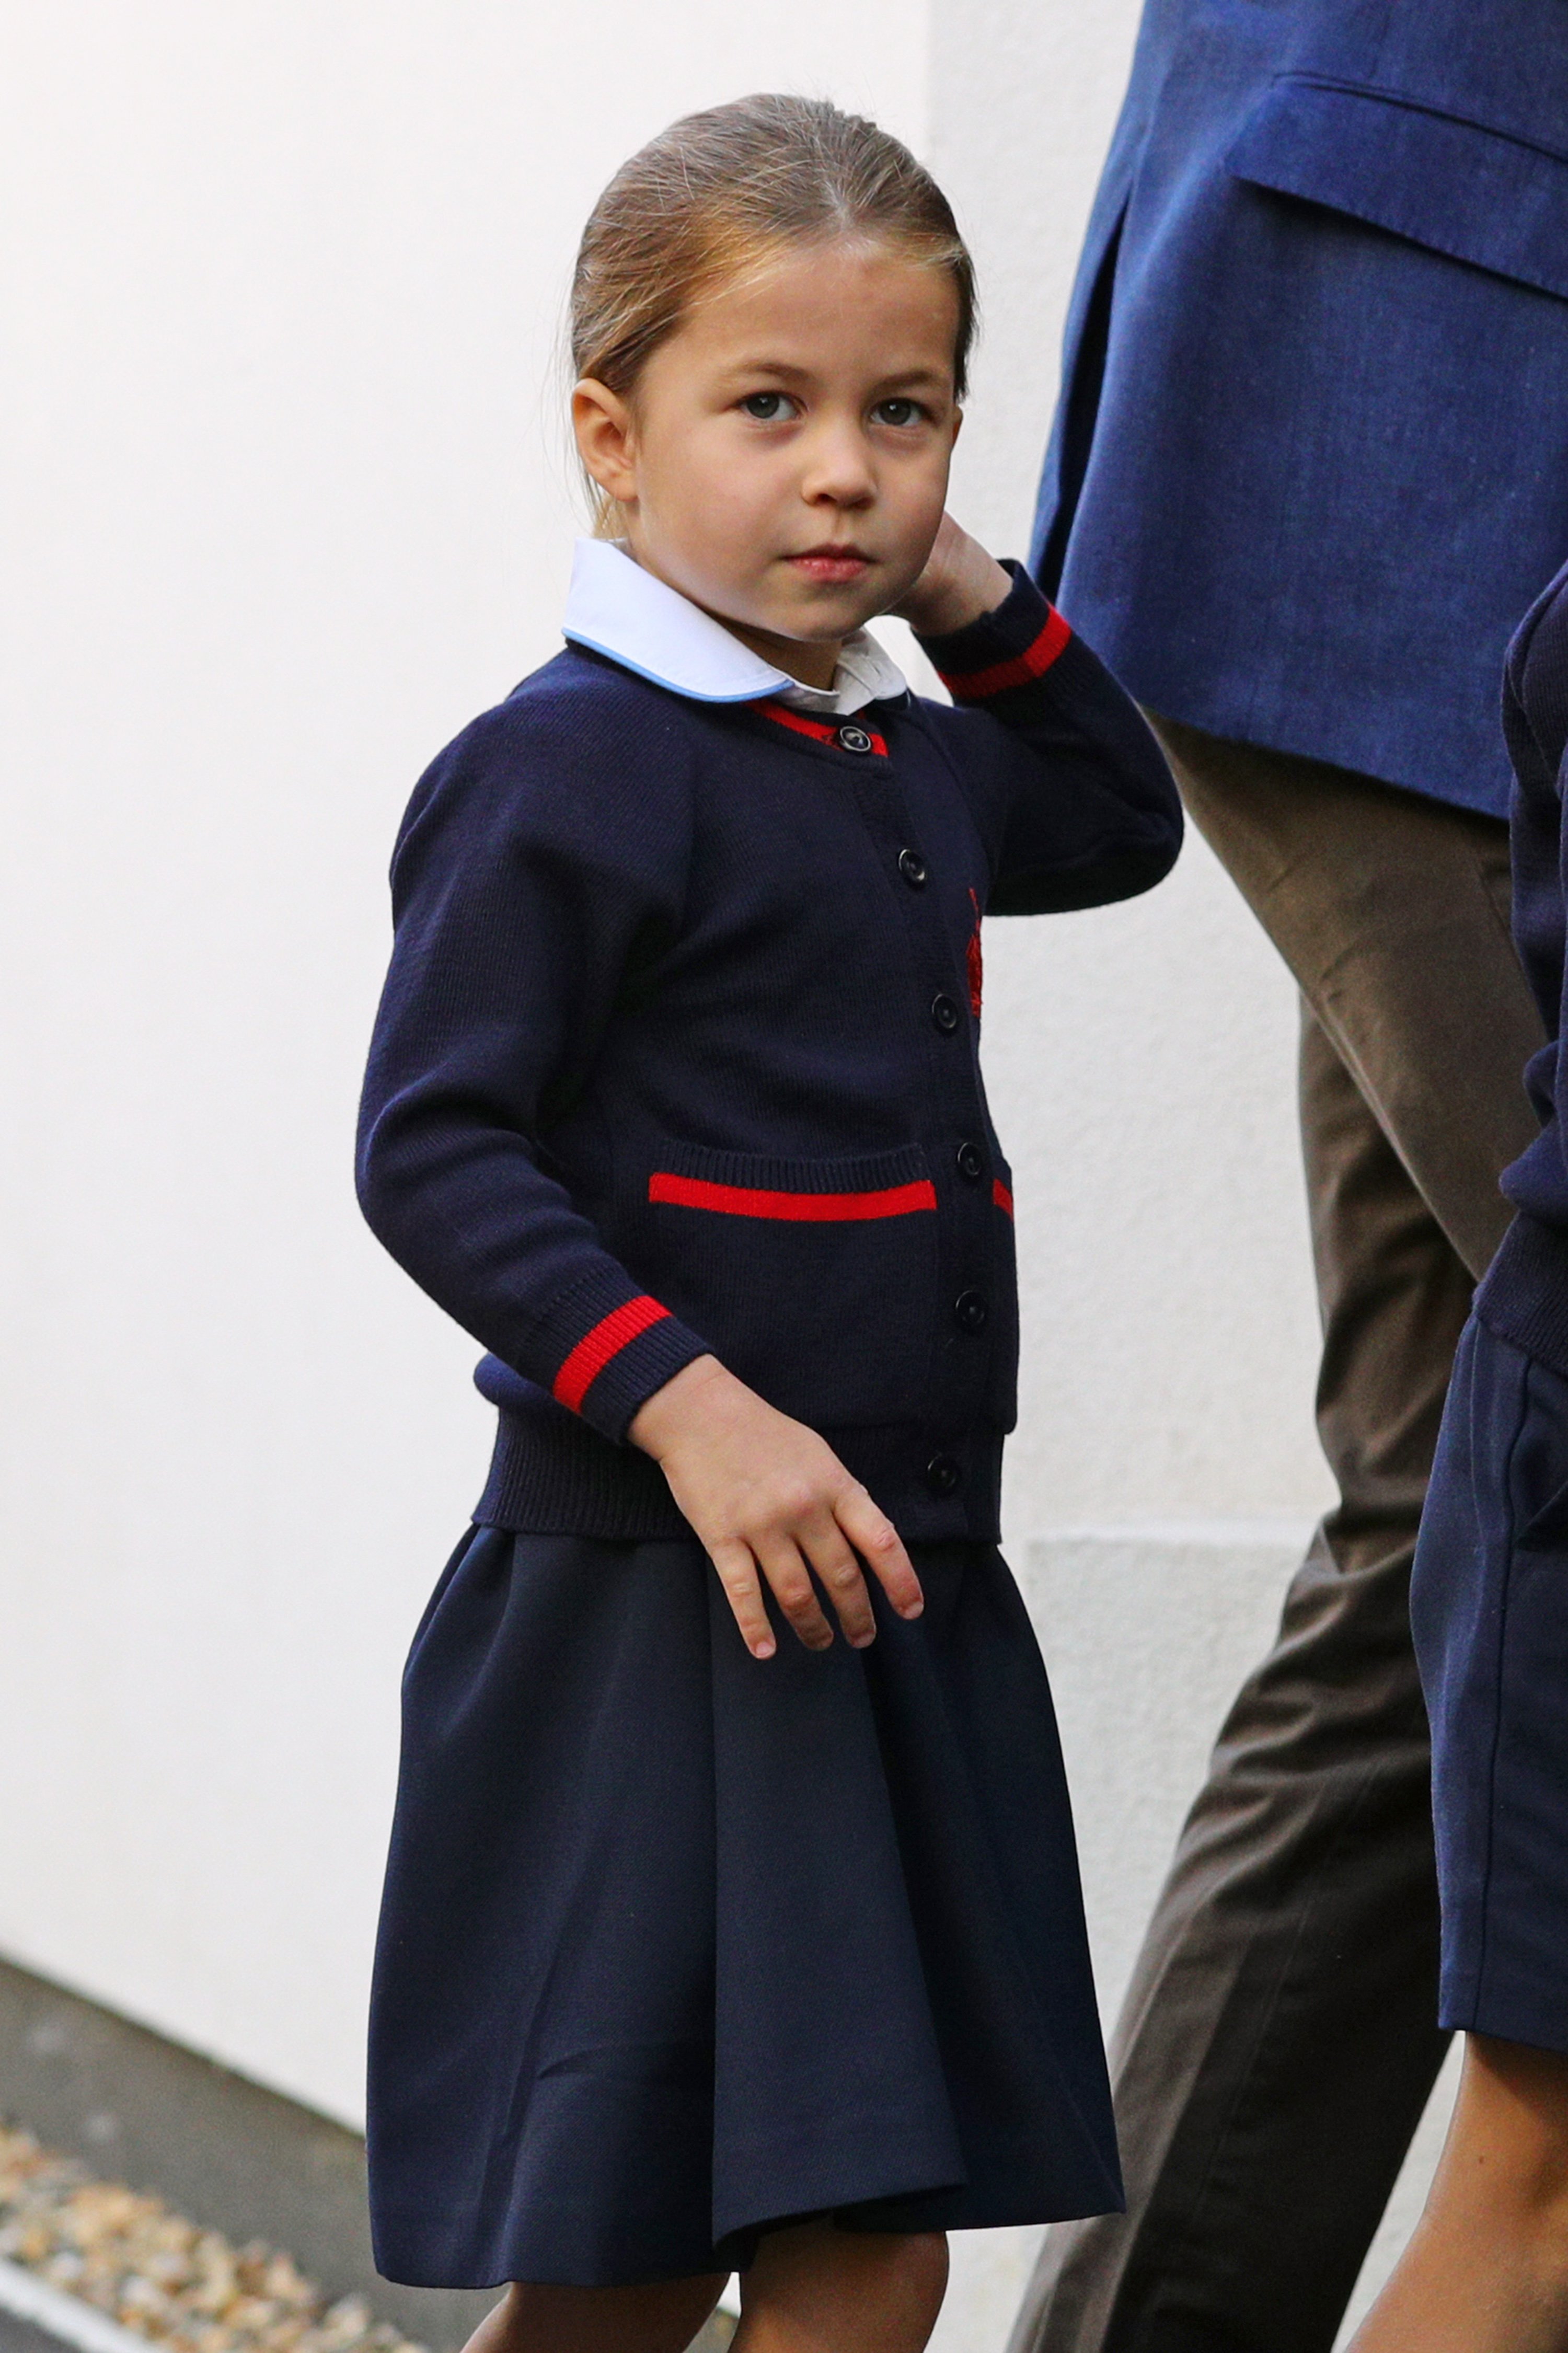 Princess Charlotte pictured arriving for her first day of school at Thomas's Battersea in London on September 5, 2019 in London, England. / Source: Getty Images